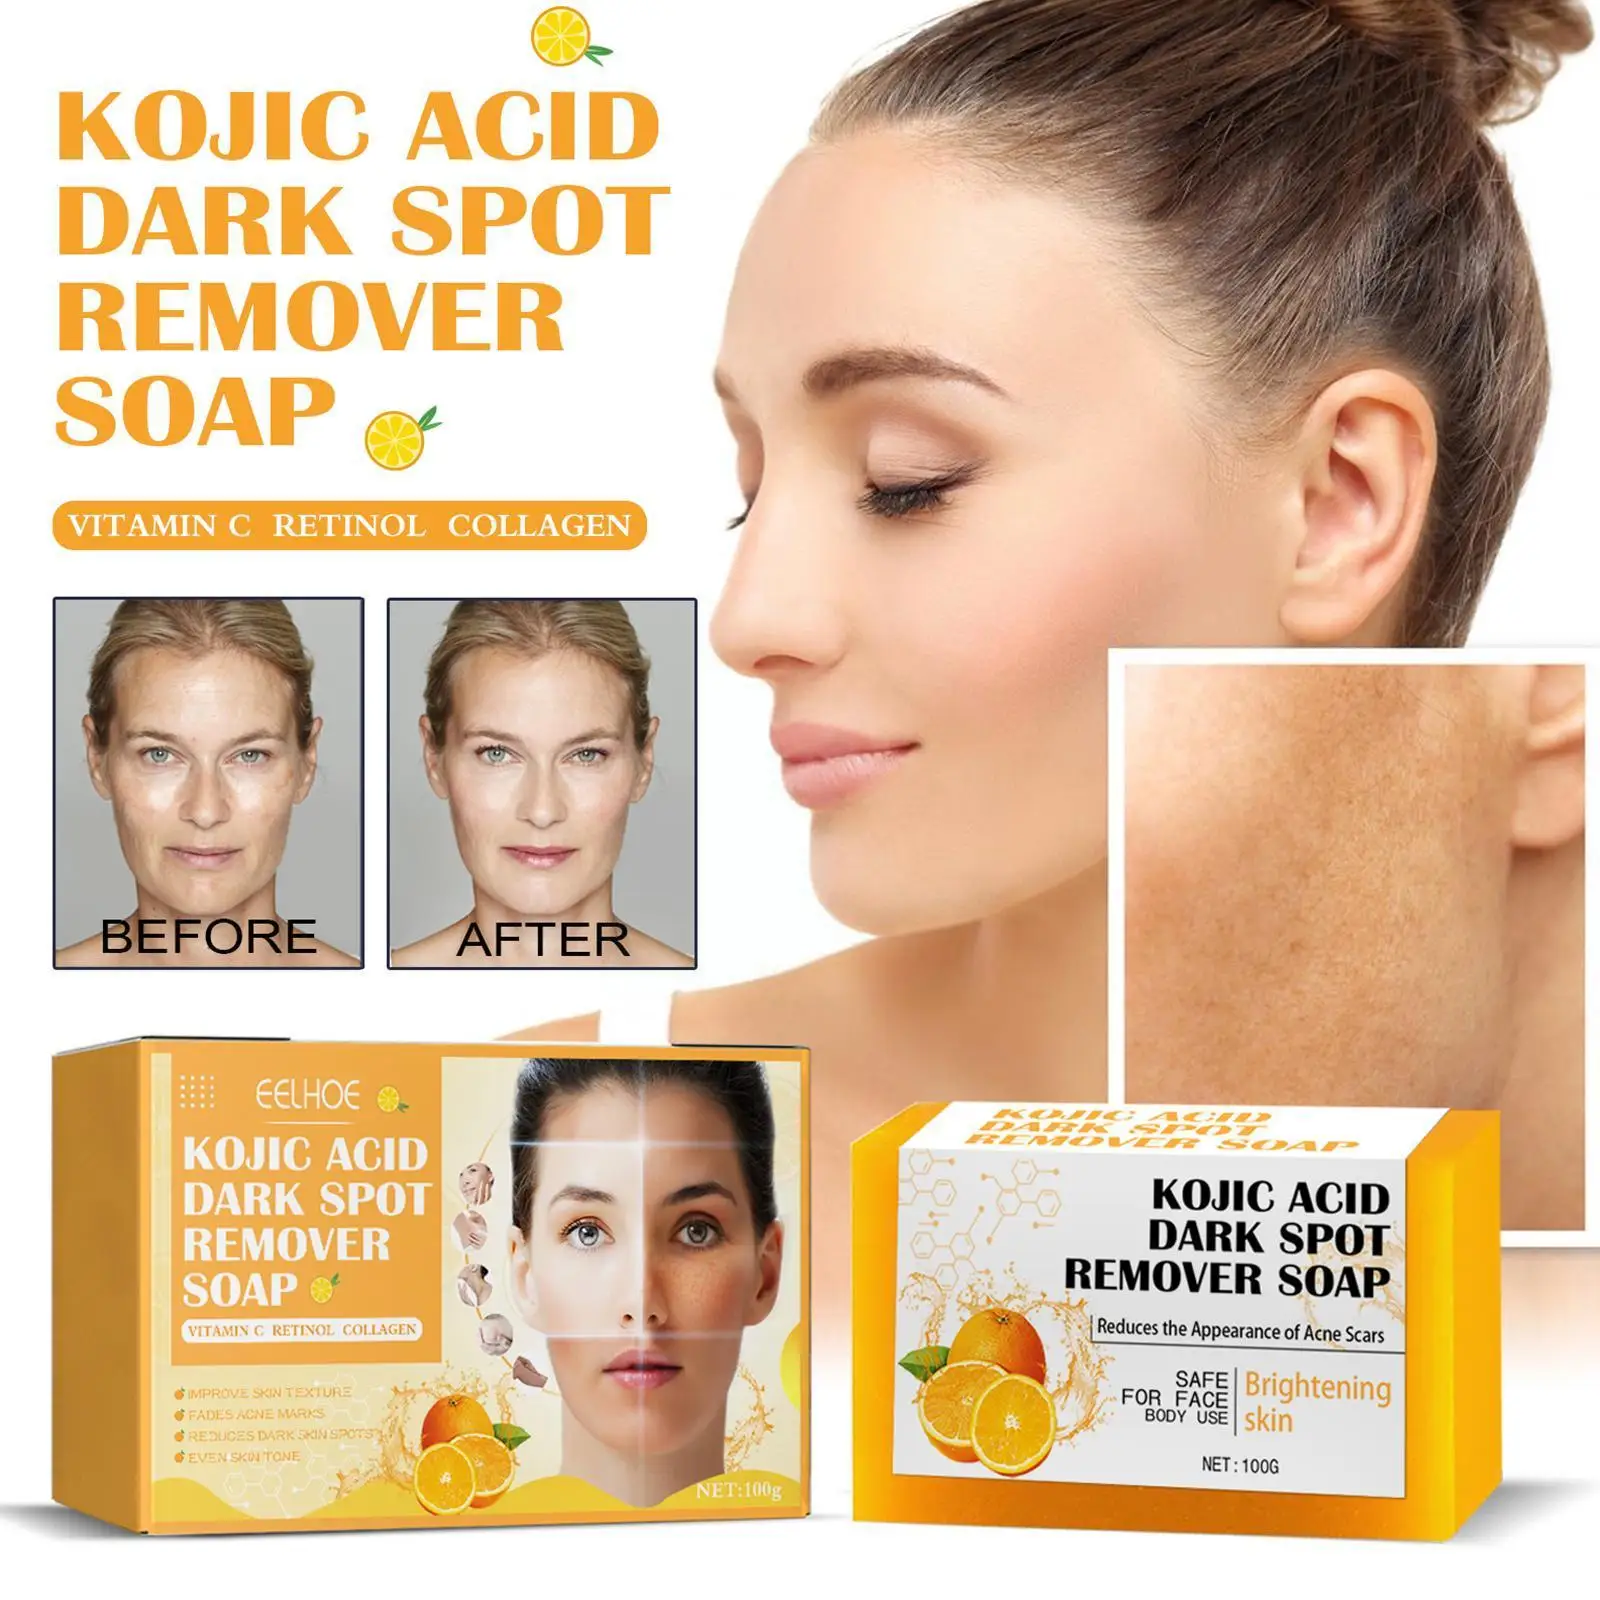 

Kojic Acid Soap Whitening Face Wash Soap Moisturizing Fade Freckle Skin Soap Cleaning Care Face Removal Spots 100g Brighten O4S7